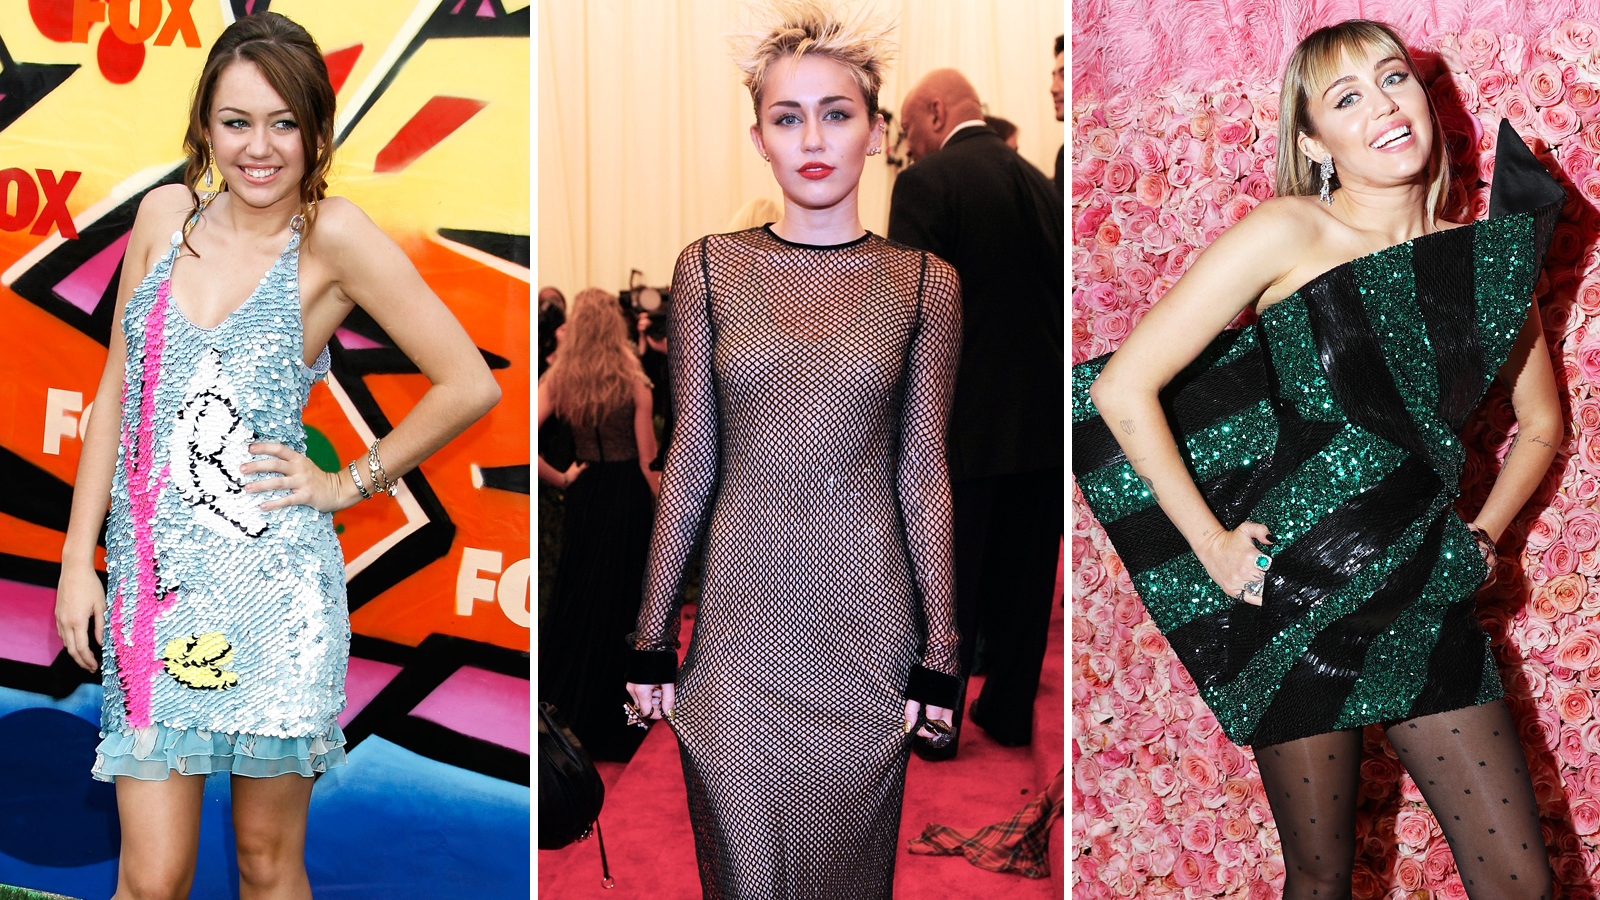 Miley Cyrus Xxx Vid - Miley Cyrus' Style Transformation Over the Years: See Photos